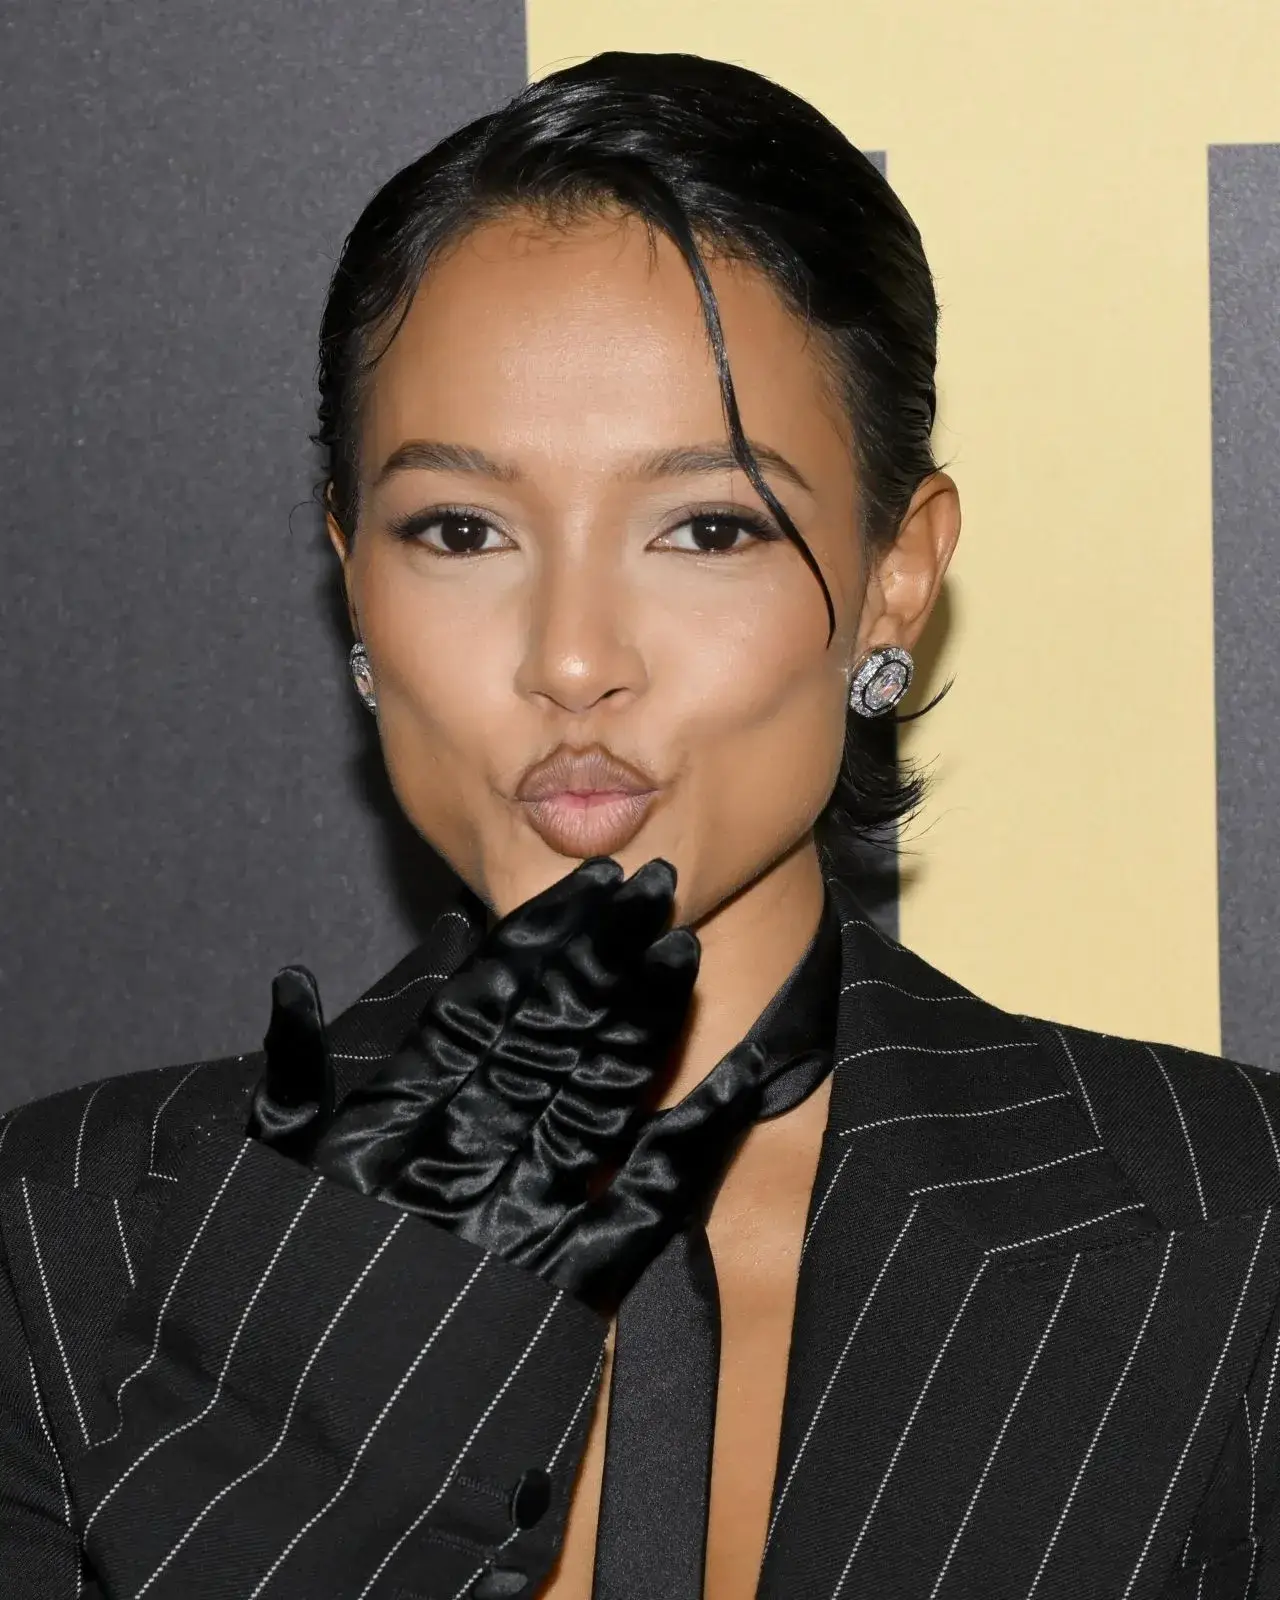 KARRUECHE TRAN AT 10TH ANNUAL TRUTH AWARDS AT THE BEVERLY HILTON IN BEVERLY HILLS